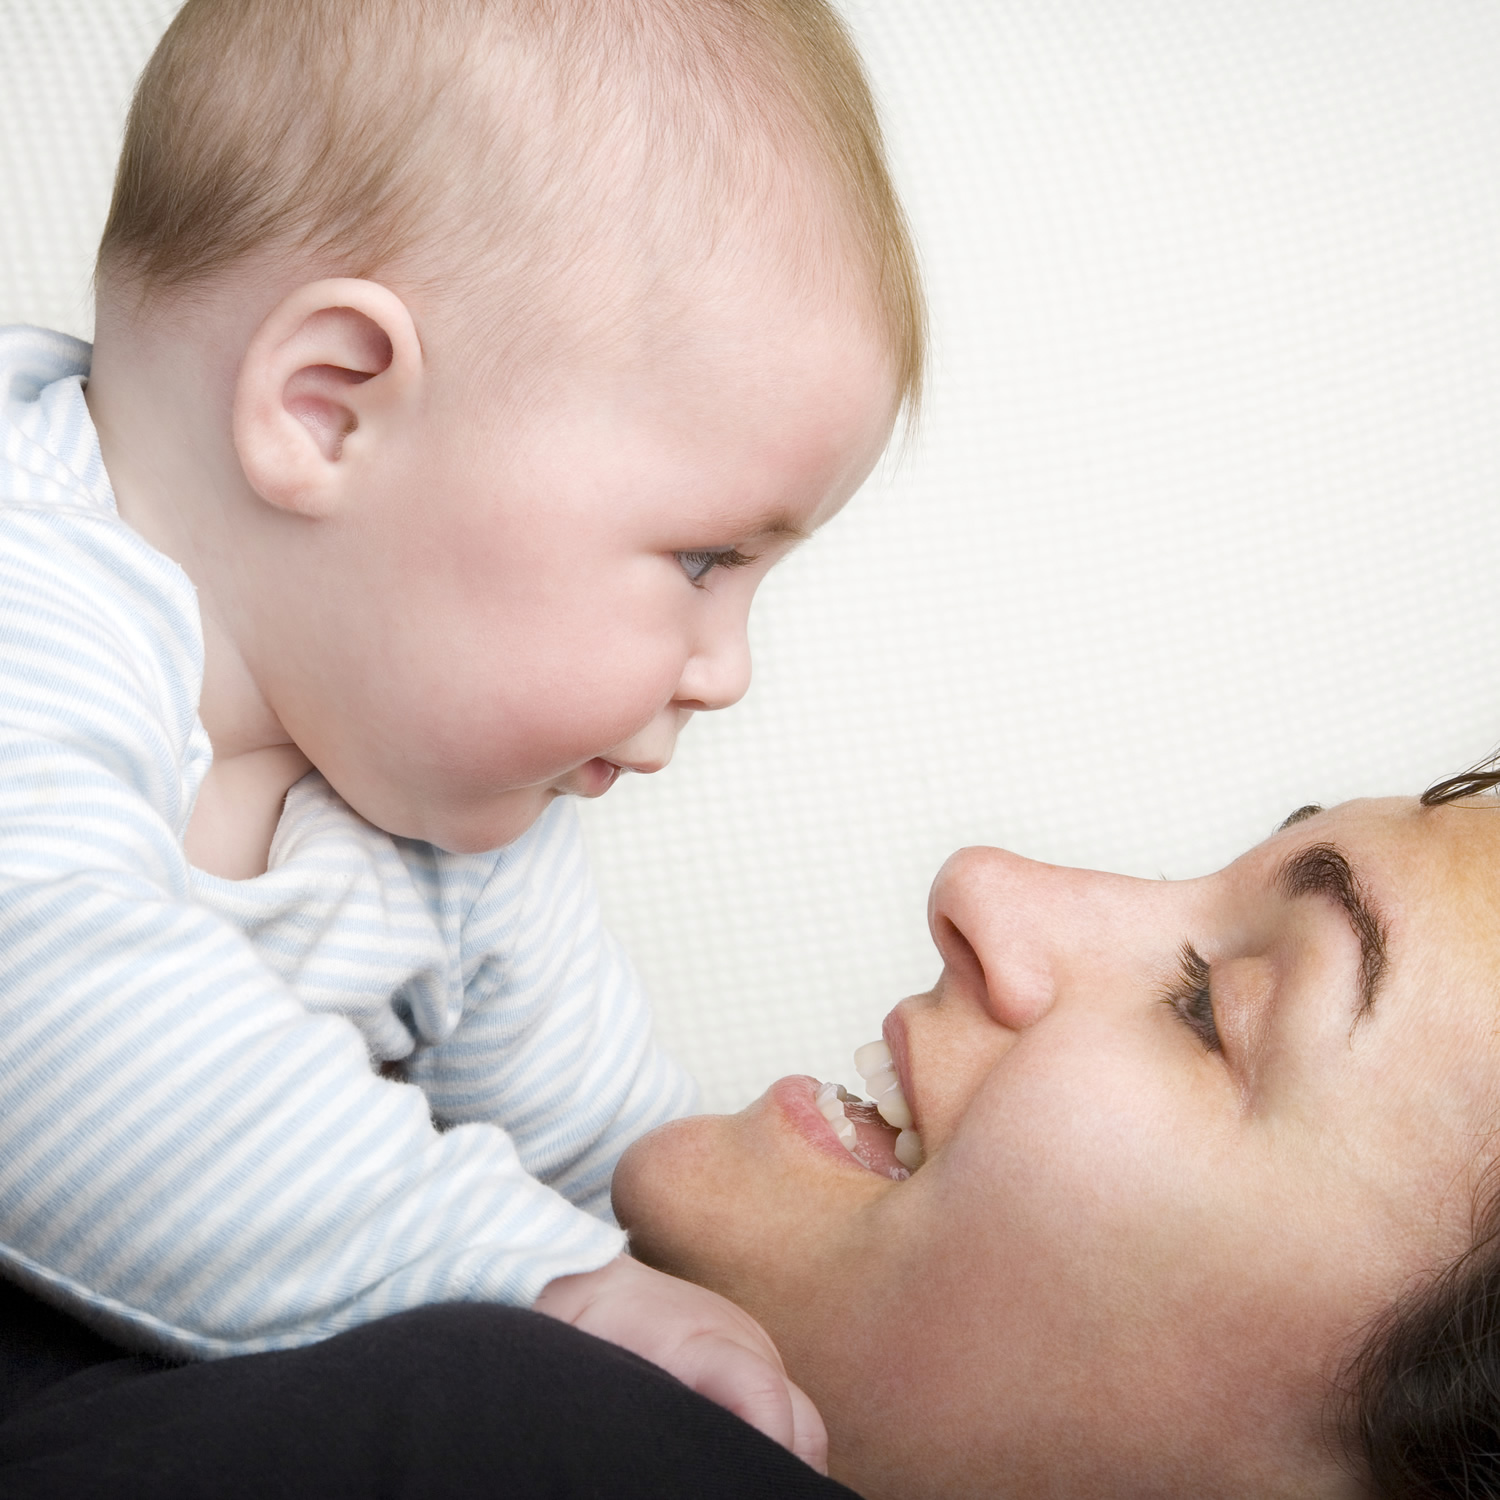 Simple ways to strengthen your baby's developing mind.